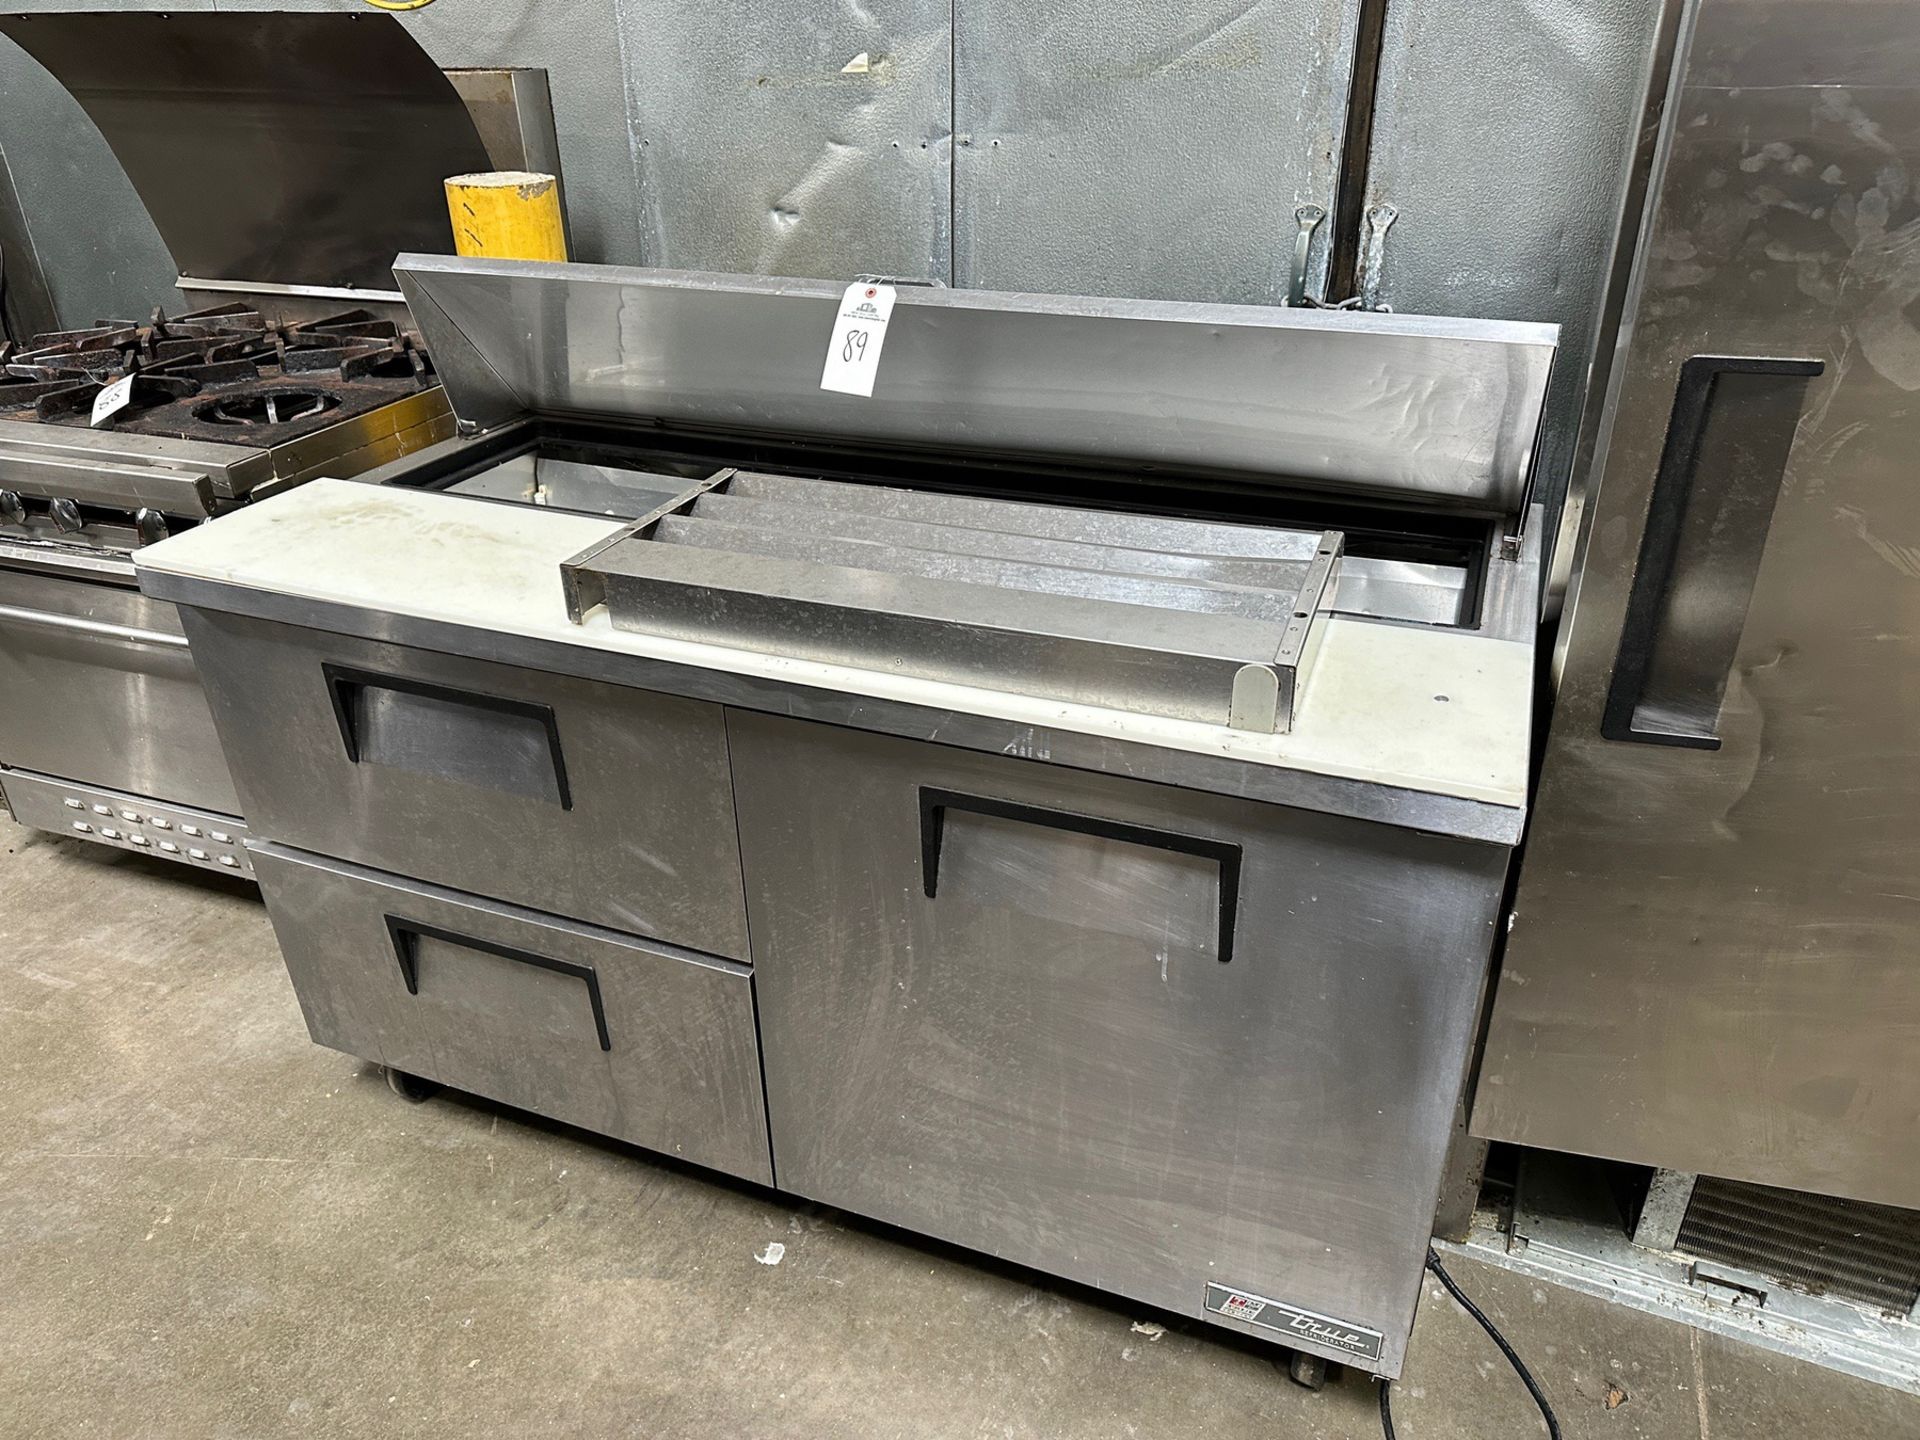 True Refrigeration Stainless Steel Refrigerated Prep Station | Rig Fee $100